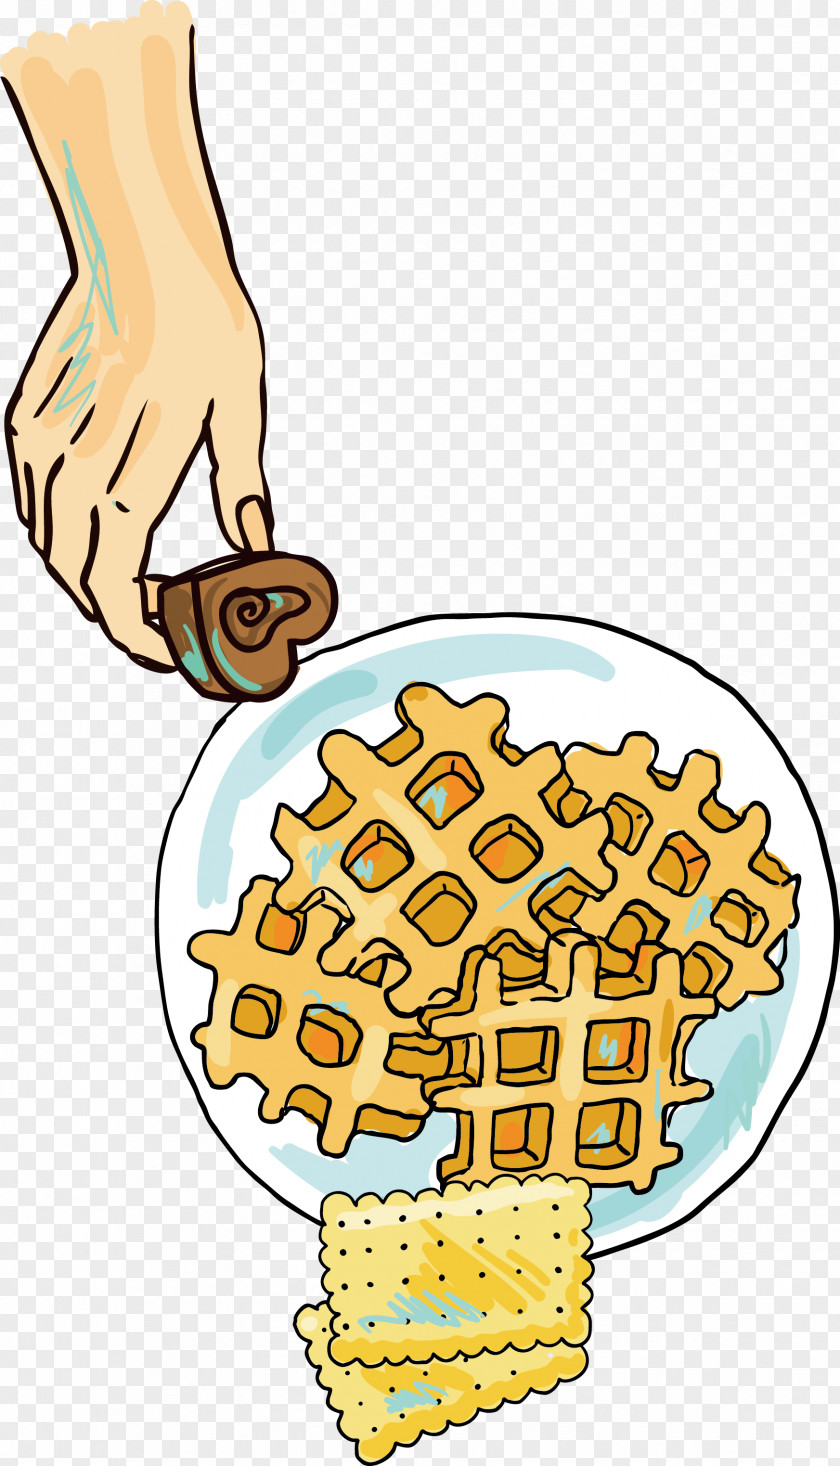 Drawing Cartoon Chocolate Cookies Chip Cookie Watercolor Painting Clip Art PNG